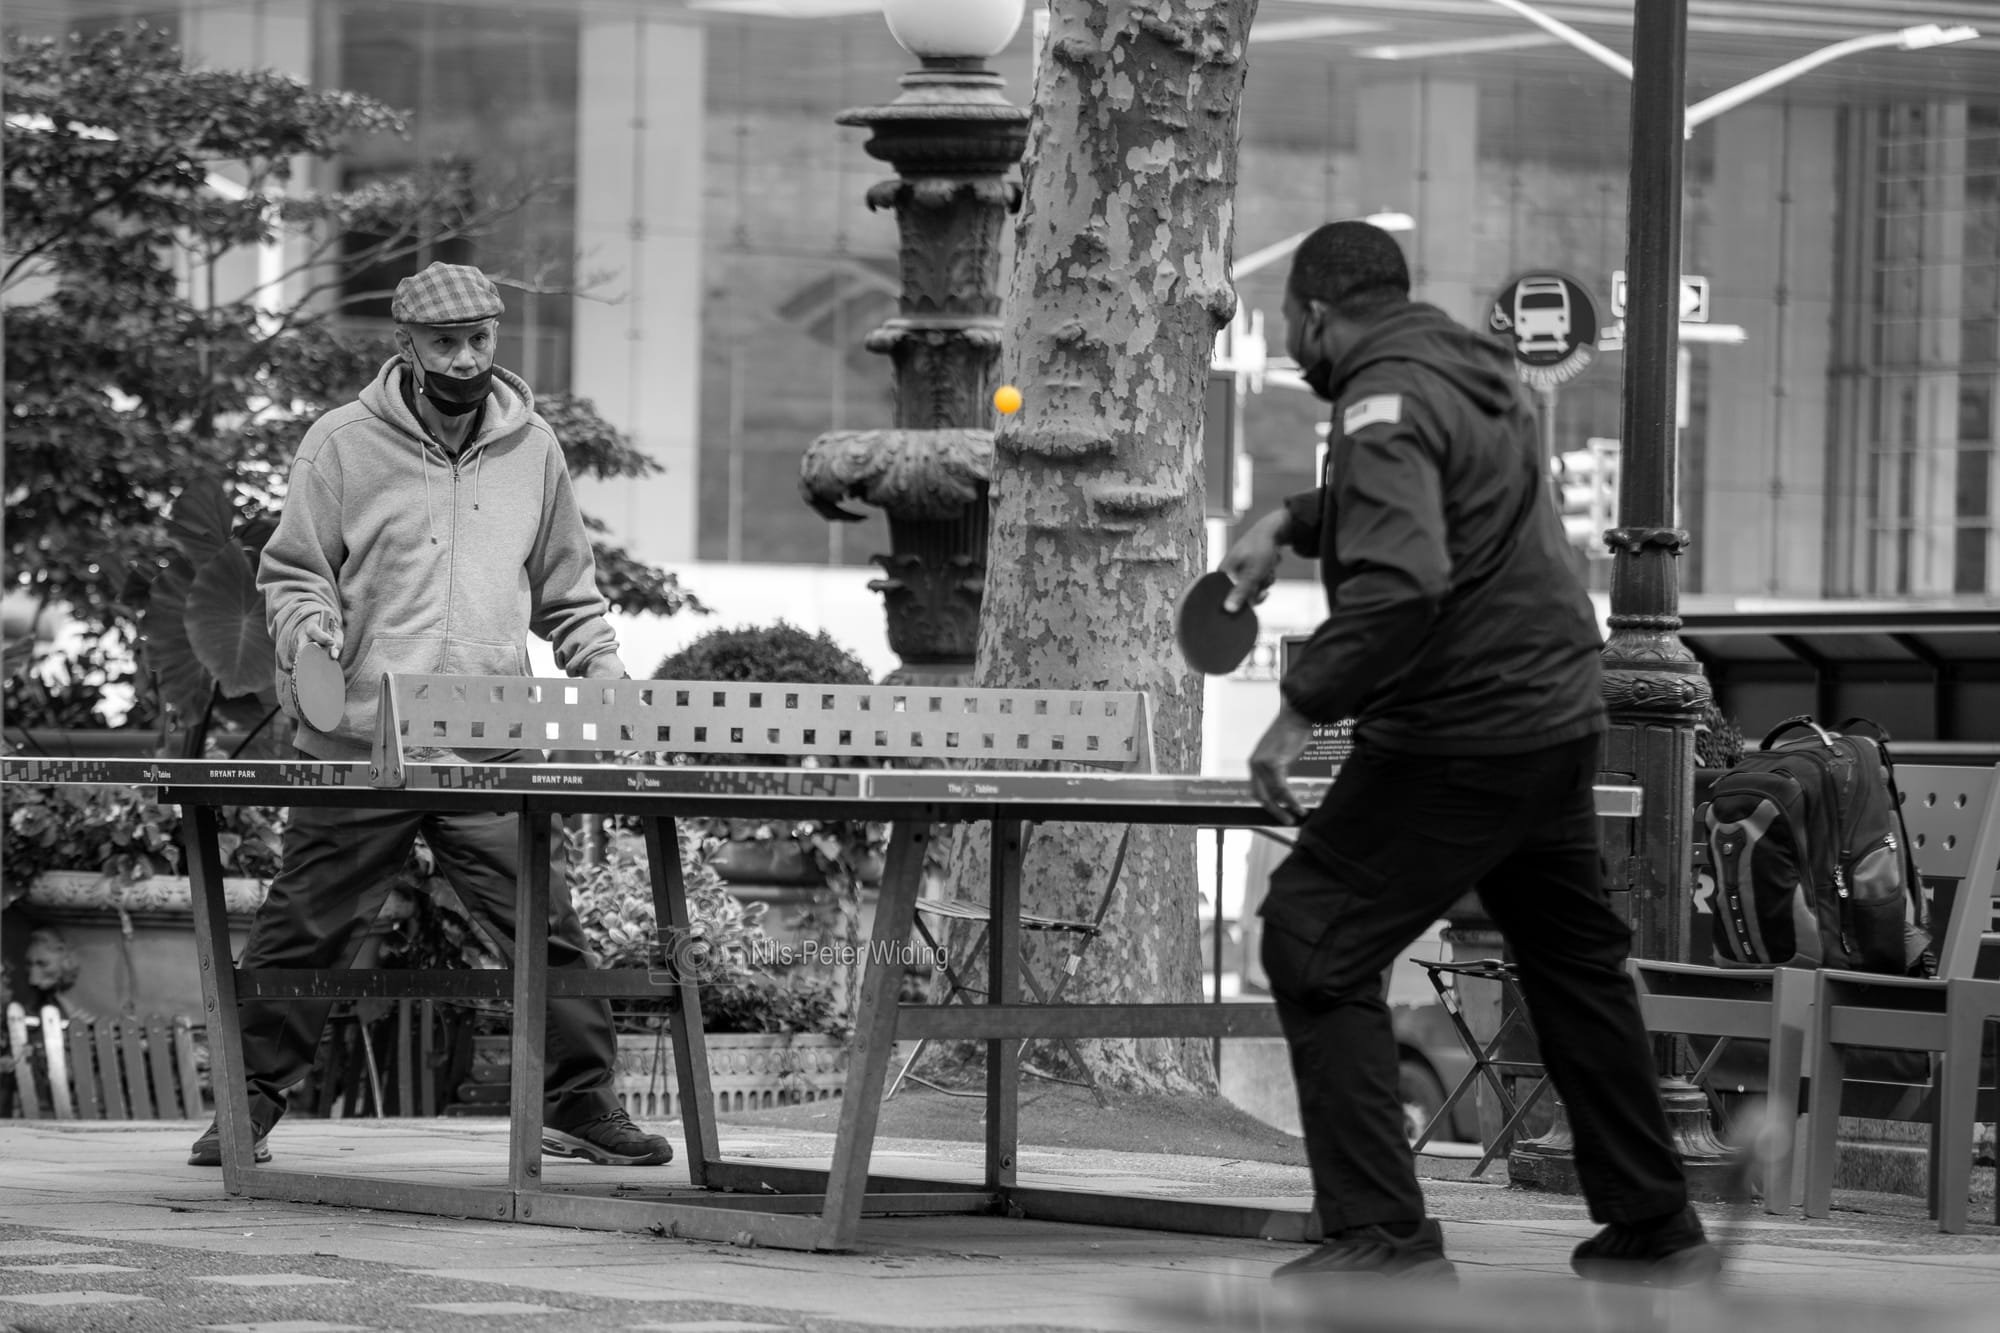 201. Table Tennis in Bryant Park